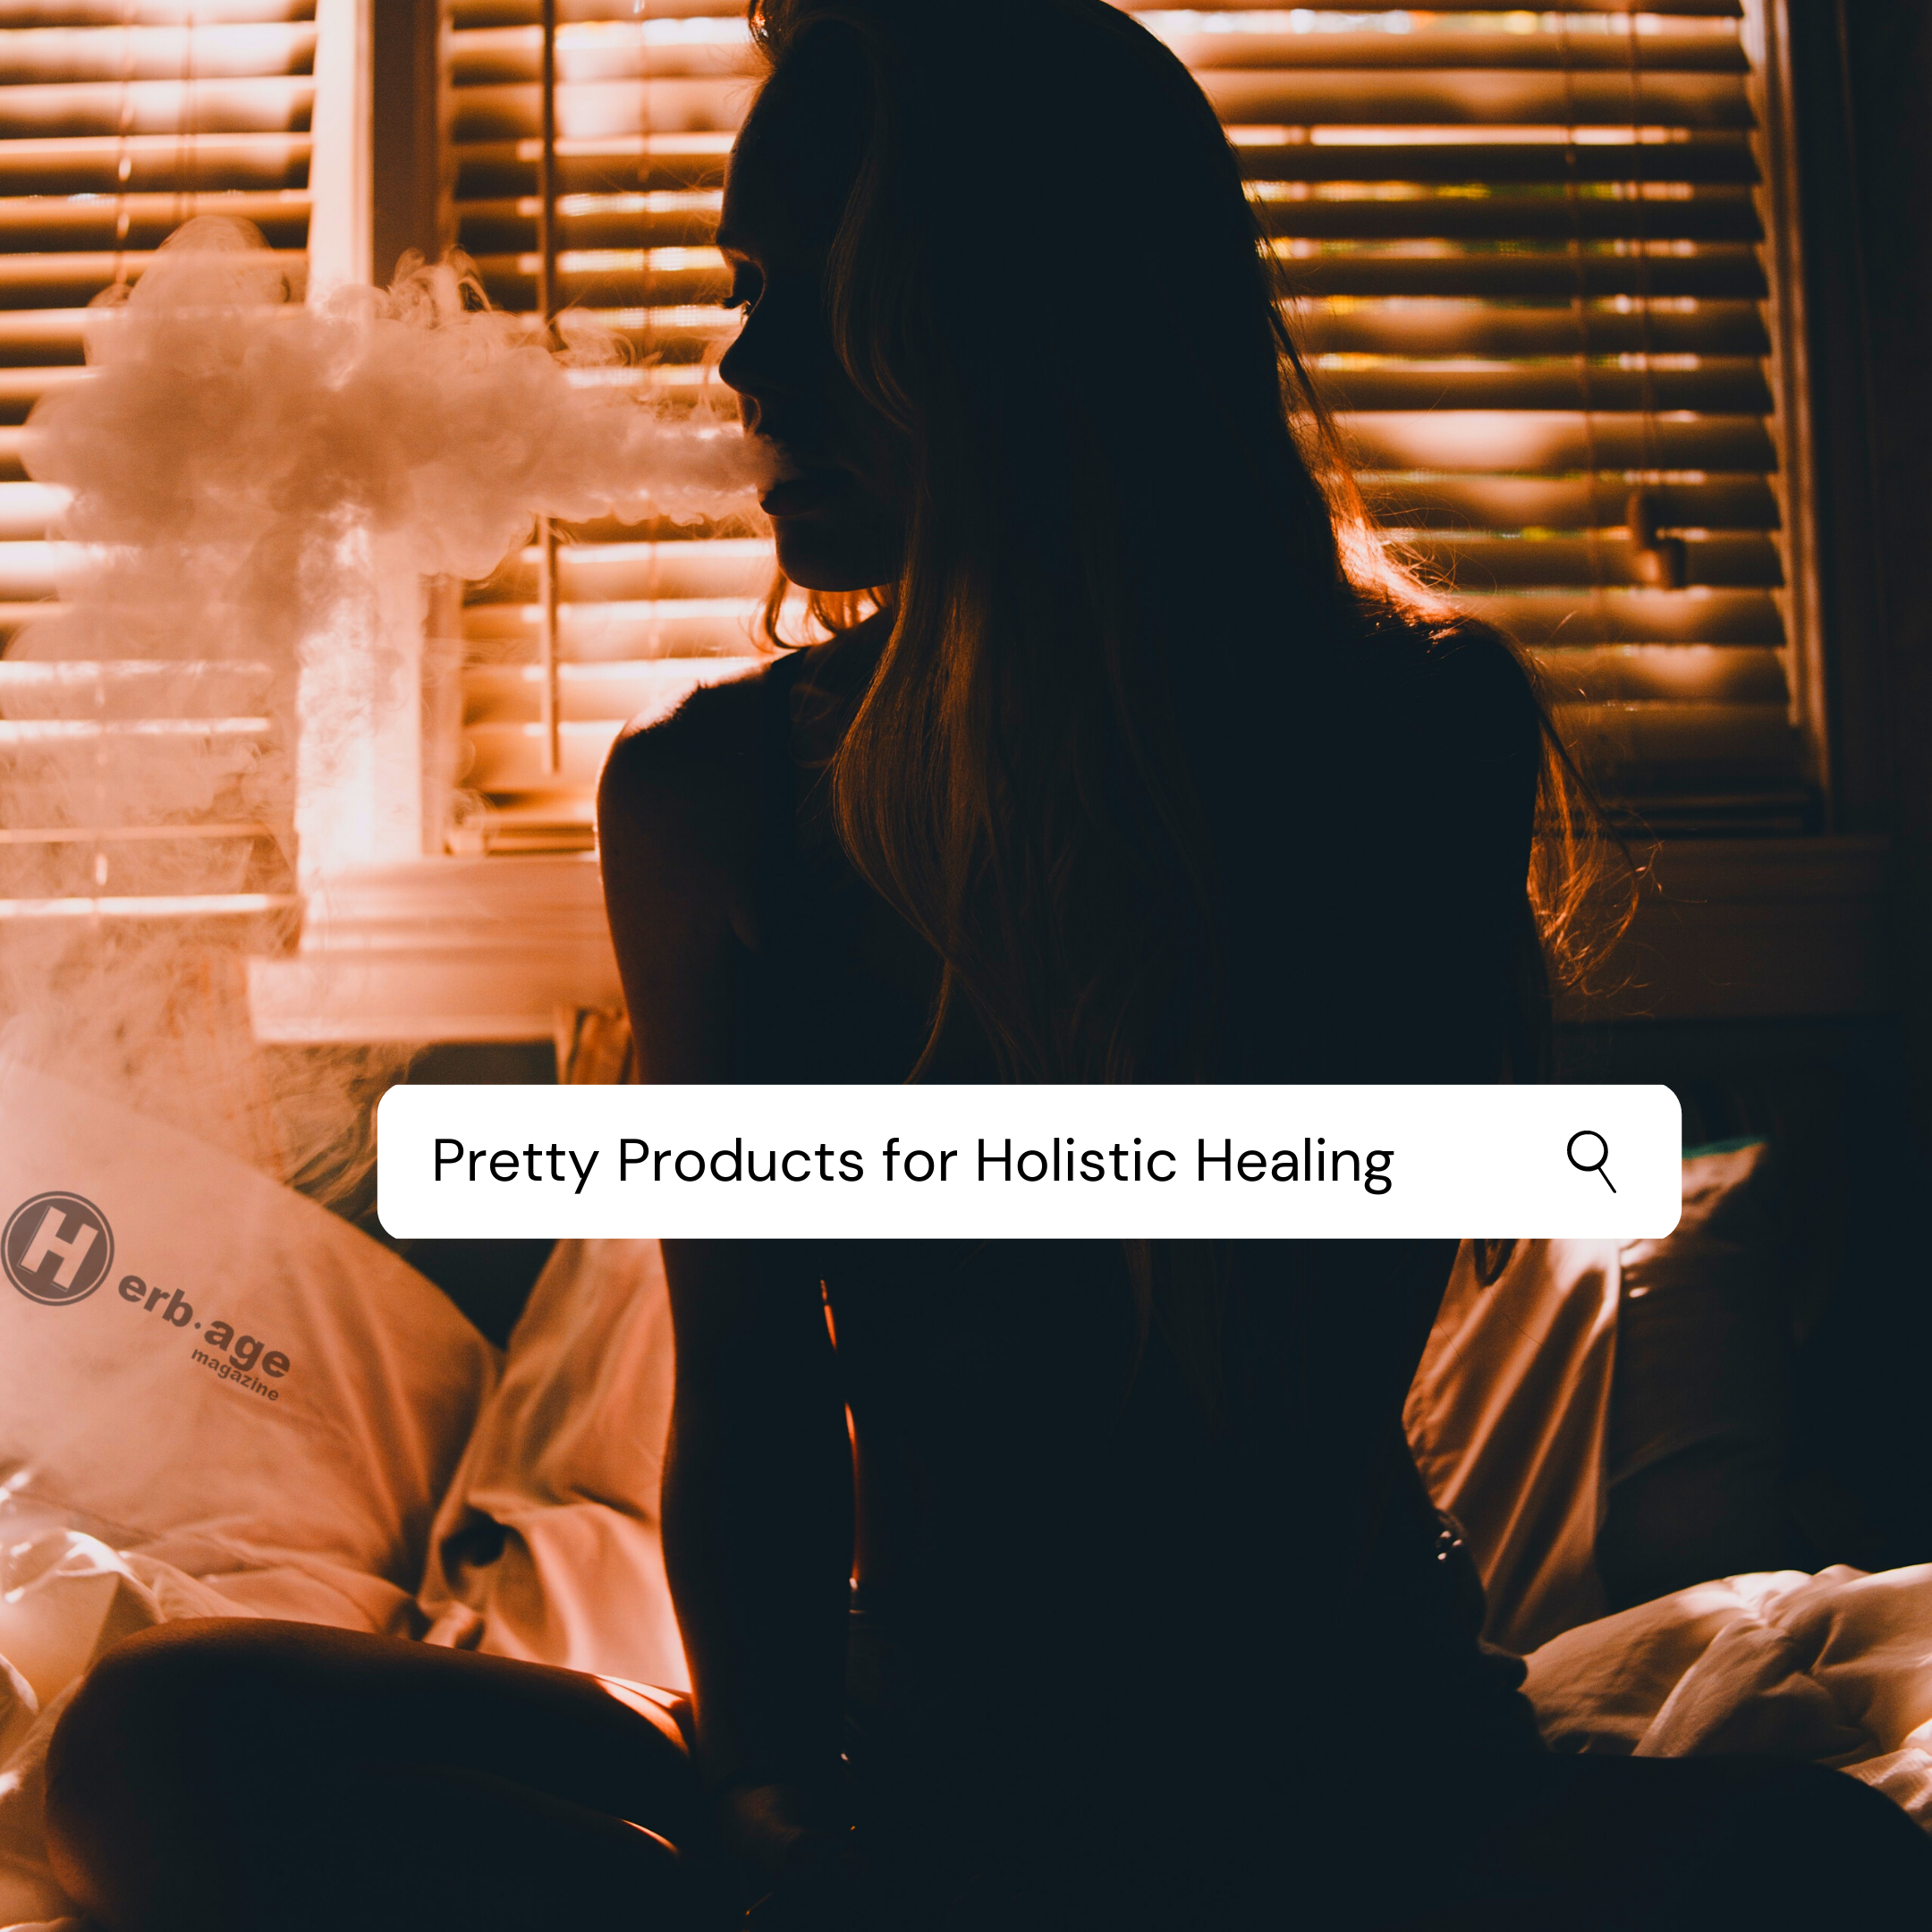 Pretty Products for Holistic Healing by Alex Marie